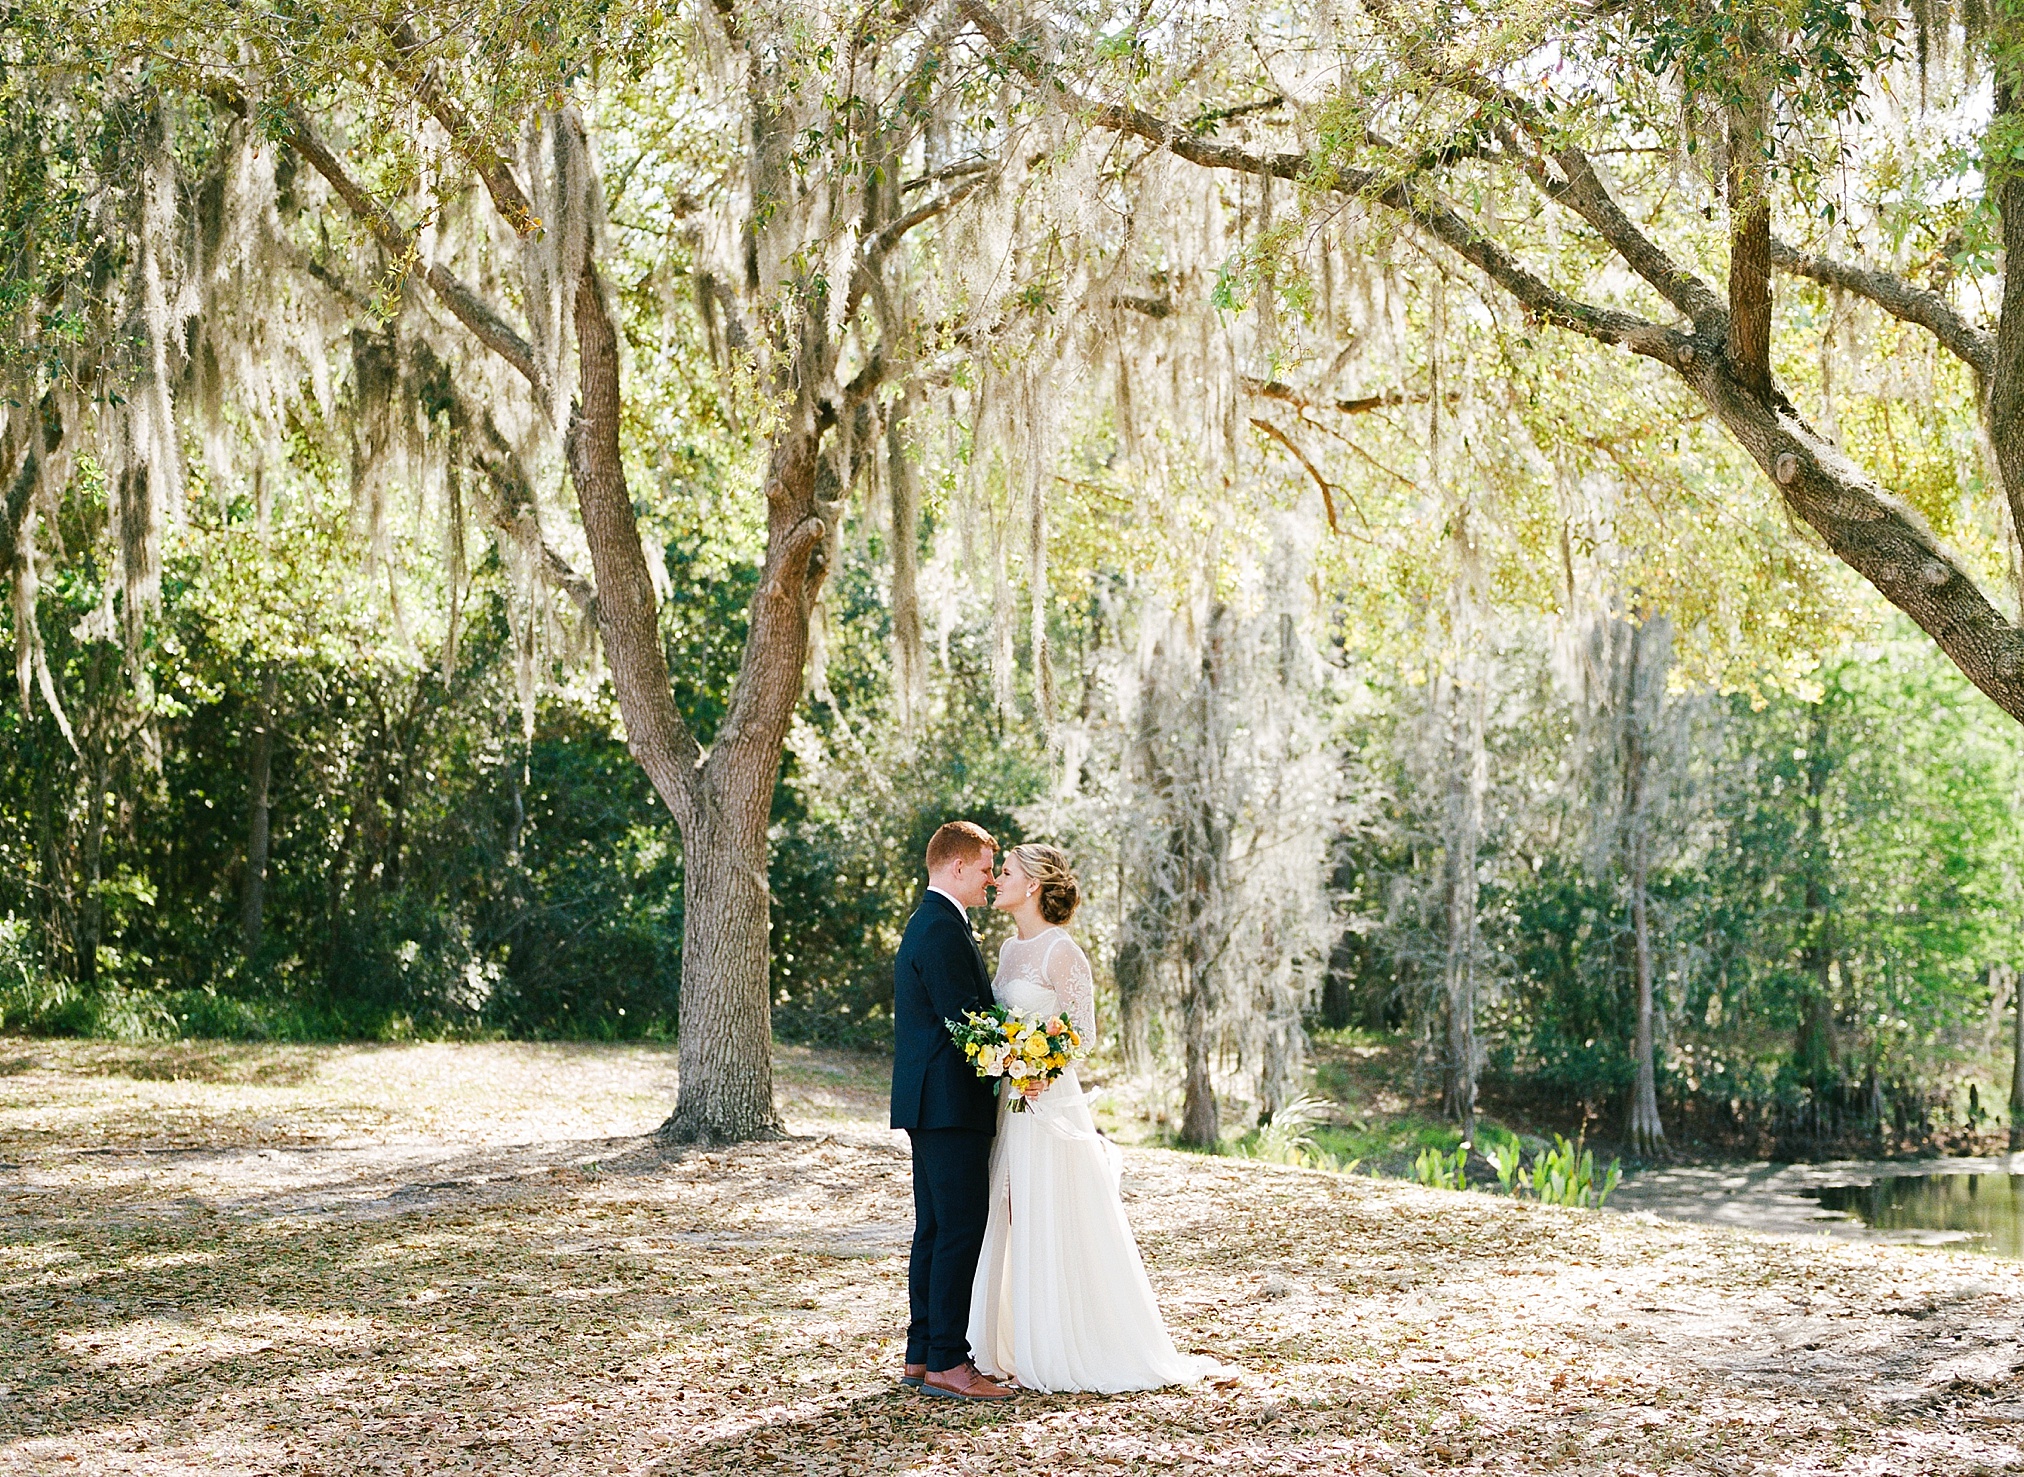 Lakeland Wedding at Haus 820, portrait of bride and groom with beautiful yellow florals 